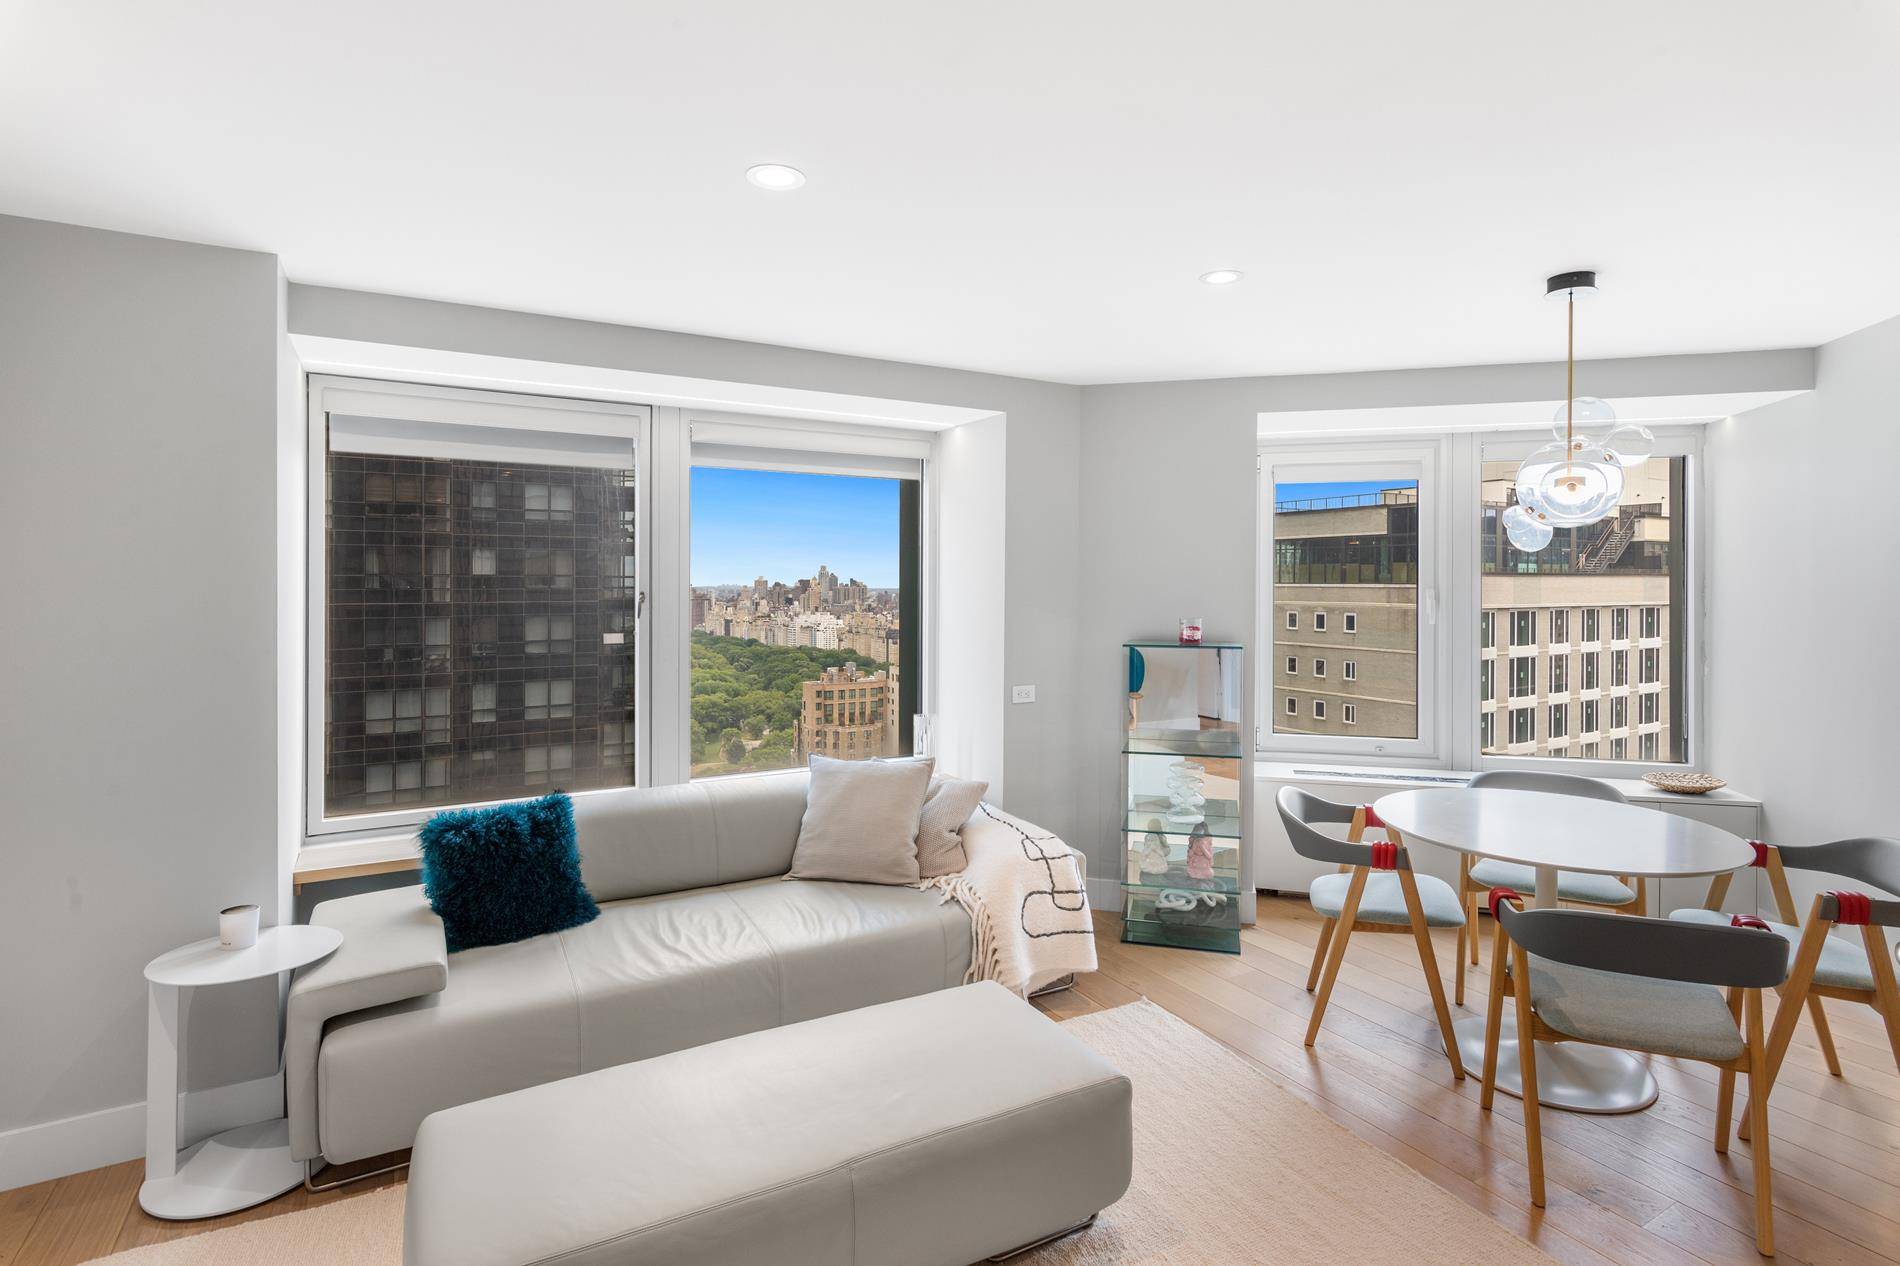 Located in the Cityspire Condominium Building in Central Midtown Manhattan, this gorgeous 2 bedroom and 2.